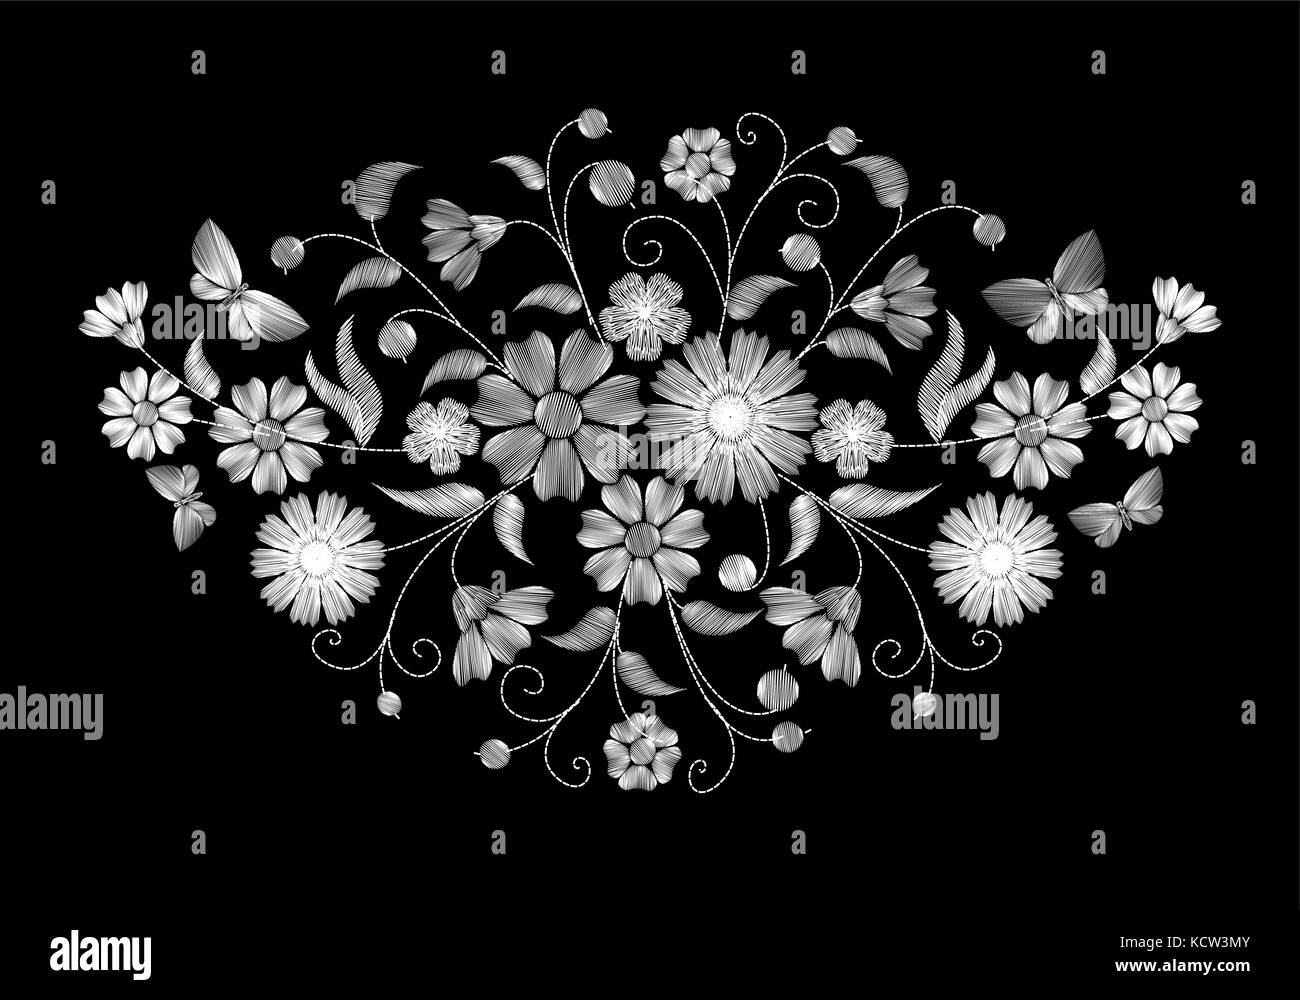 Embroidery white wild flowers on a black background. imitation lace. fashionable clothing decoration. traditional pattern. vector illustration Stock Vector